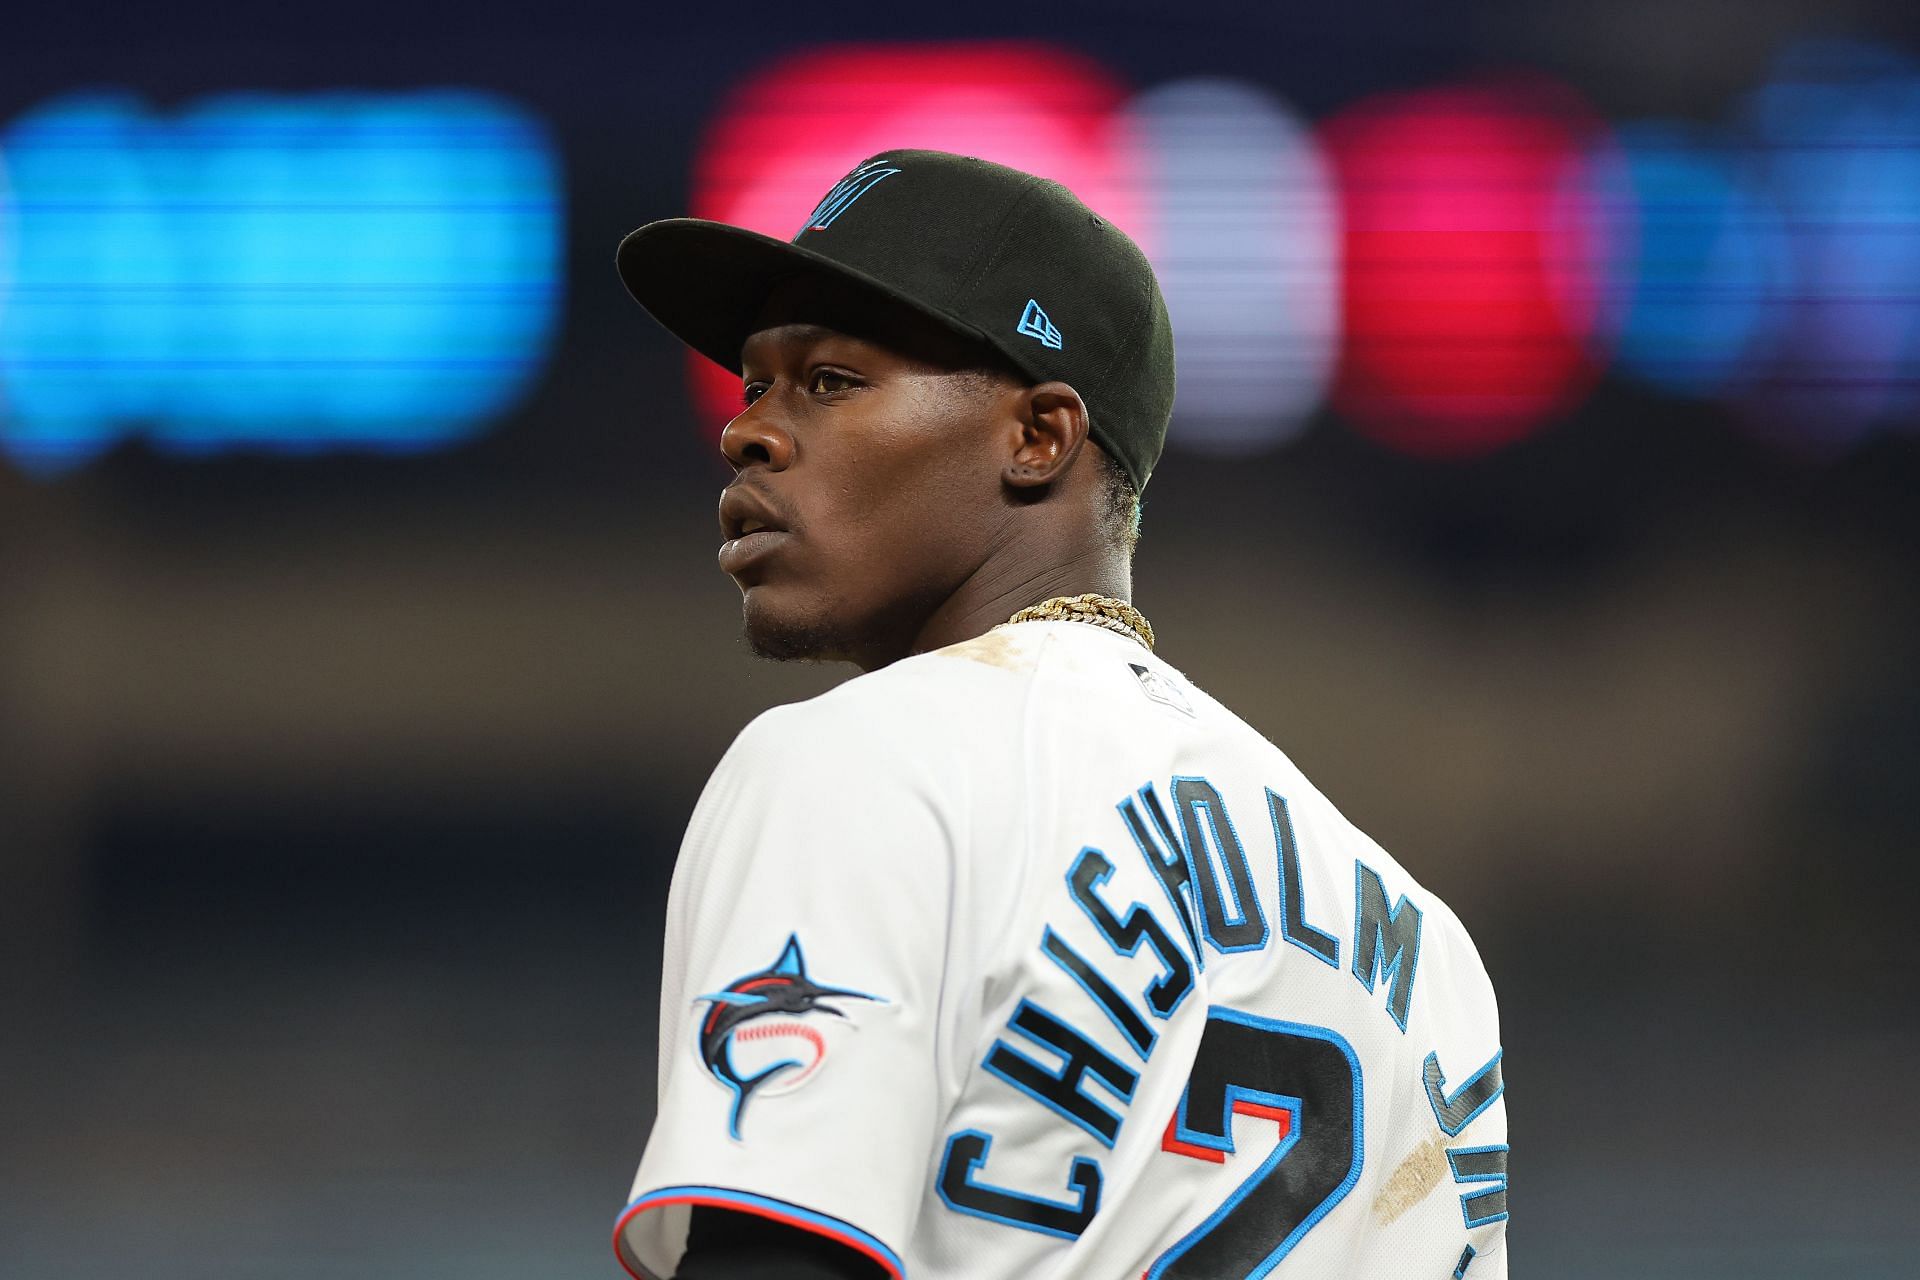 Rosenthal: Think Marlins' Jazz Chisholm is upset about move to center  field? He suggested it - The Athletic